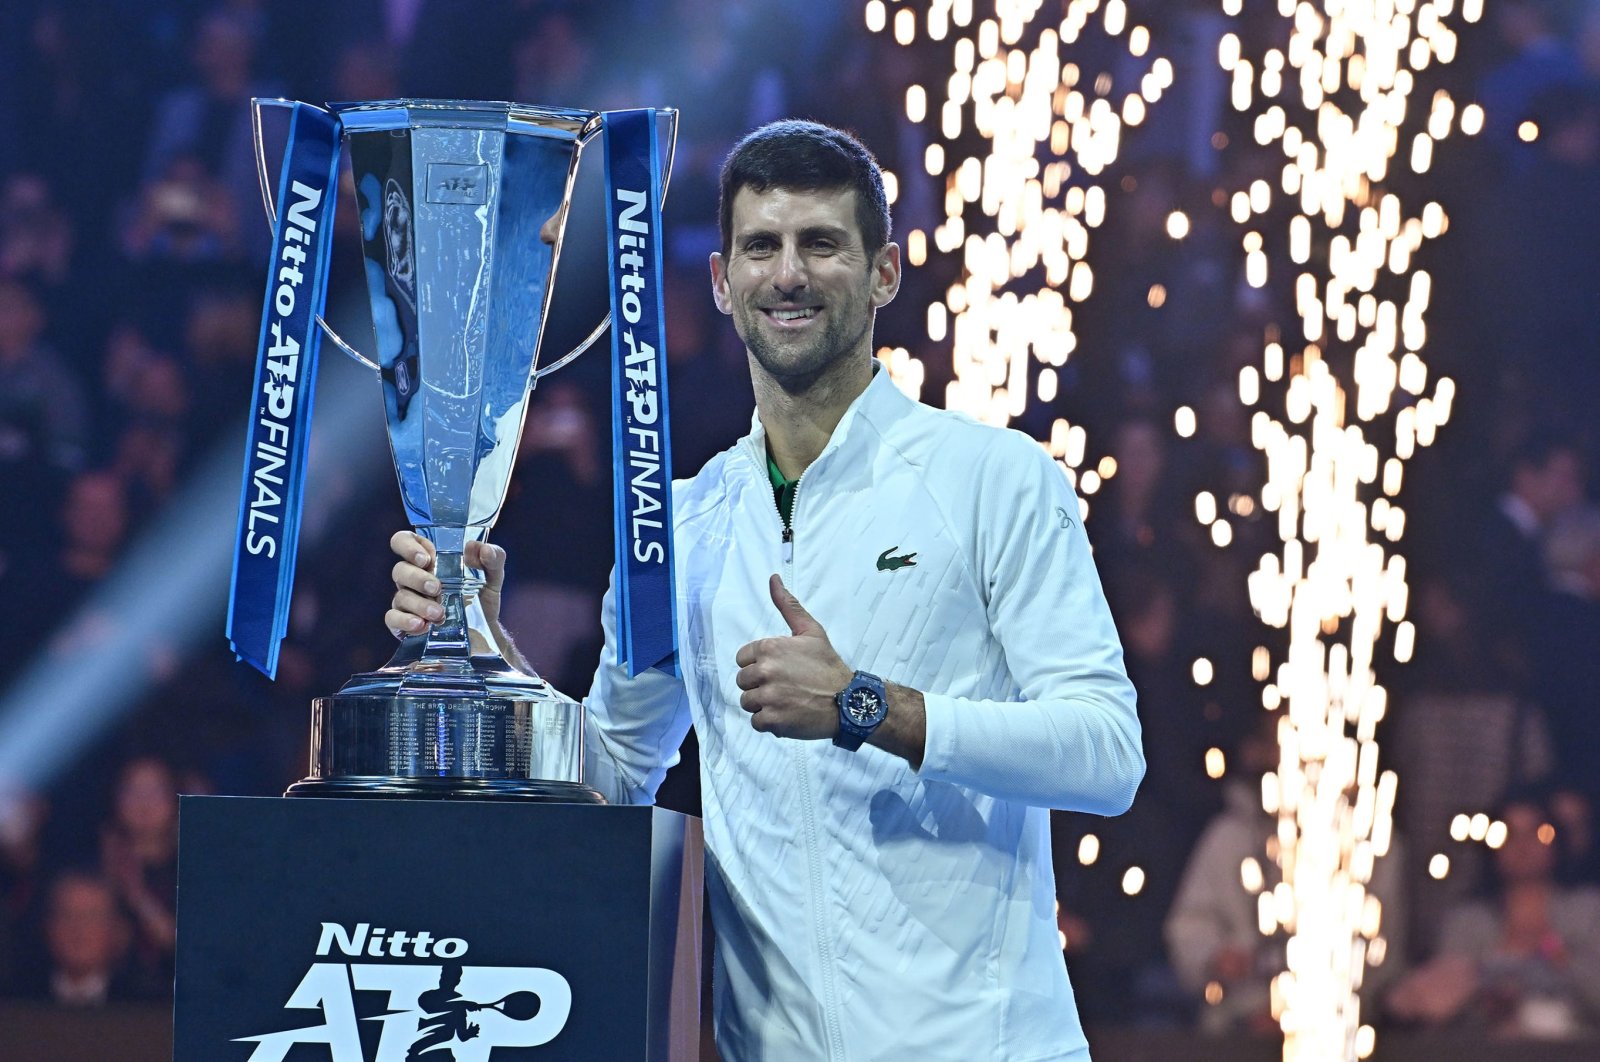 Novak Djokovic of Serbia celebrates after winning against Casper Ruud of Norway the singles final of the Nitto ATP Finals 2022 tennis tournament at the Pala Alpitour arena. Turin, Italy, Nov. 20 2022. (EPA Photo)